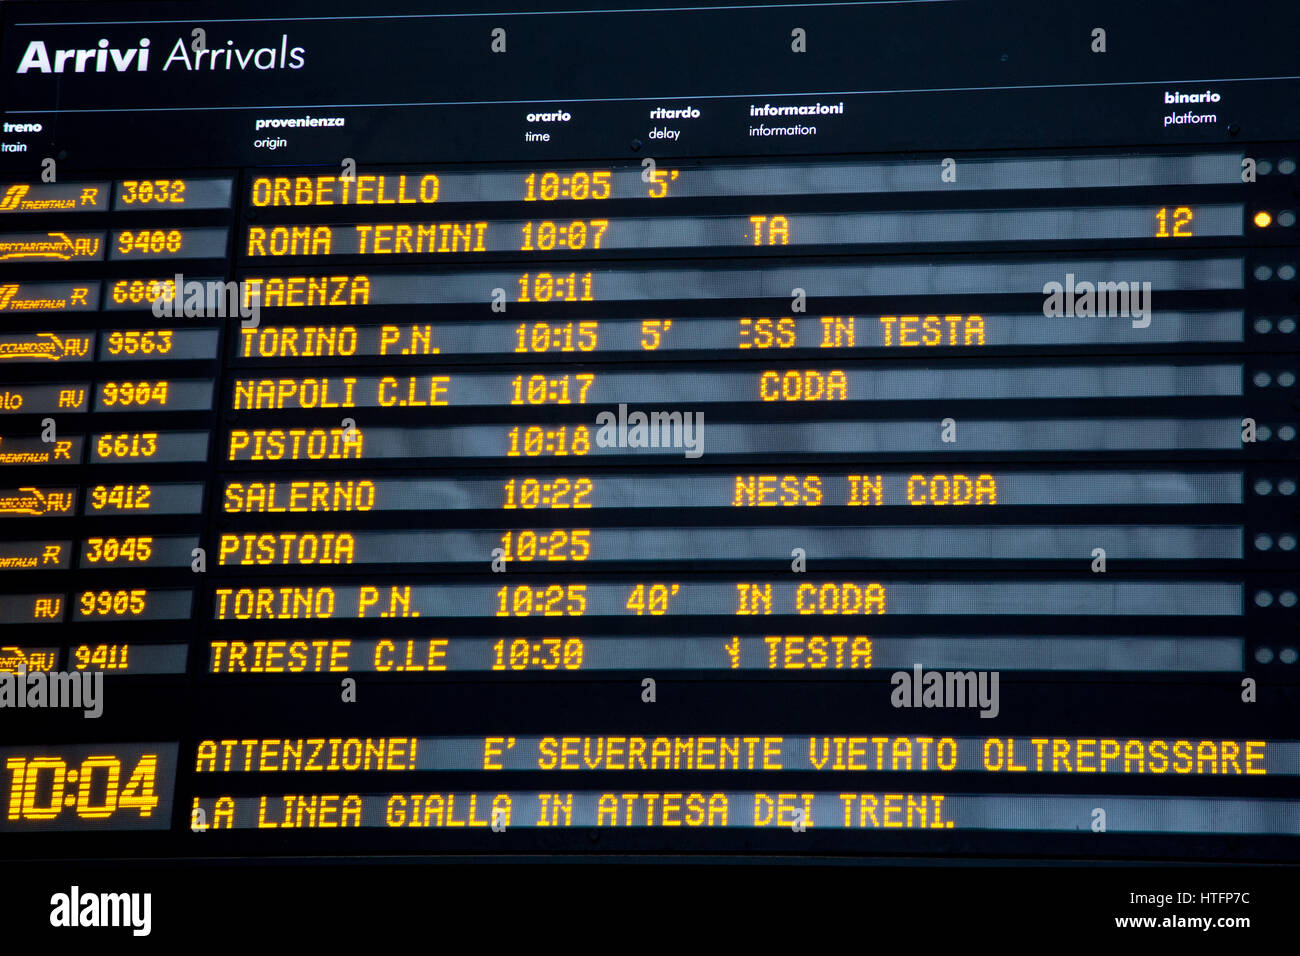 Arrivals board at Stazione di Santa Maria Novella in Florence showing train arrivals from a variety of destinations in Italy. Stock Photo